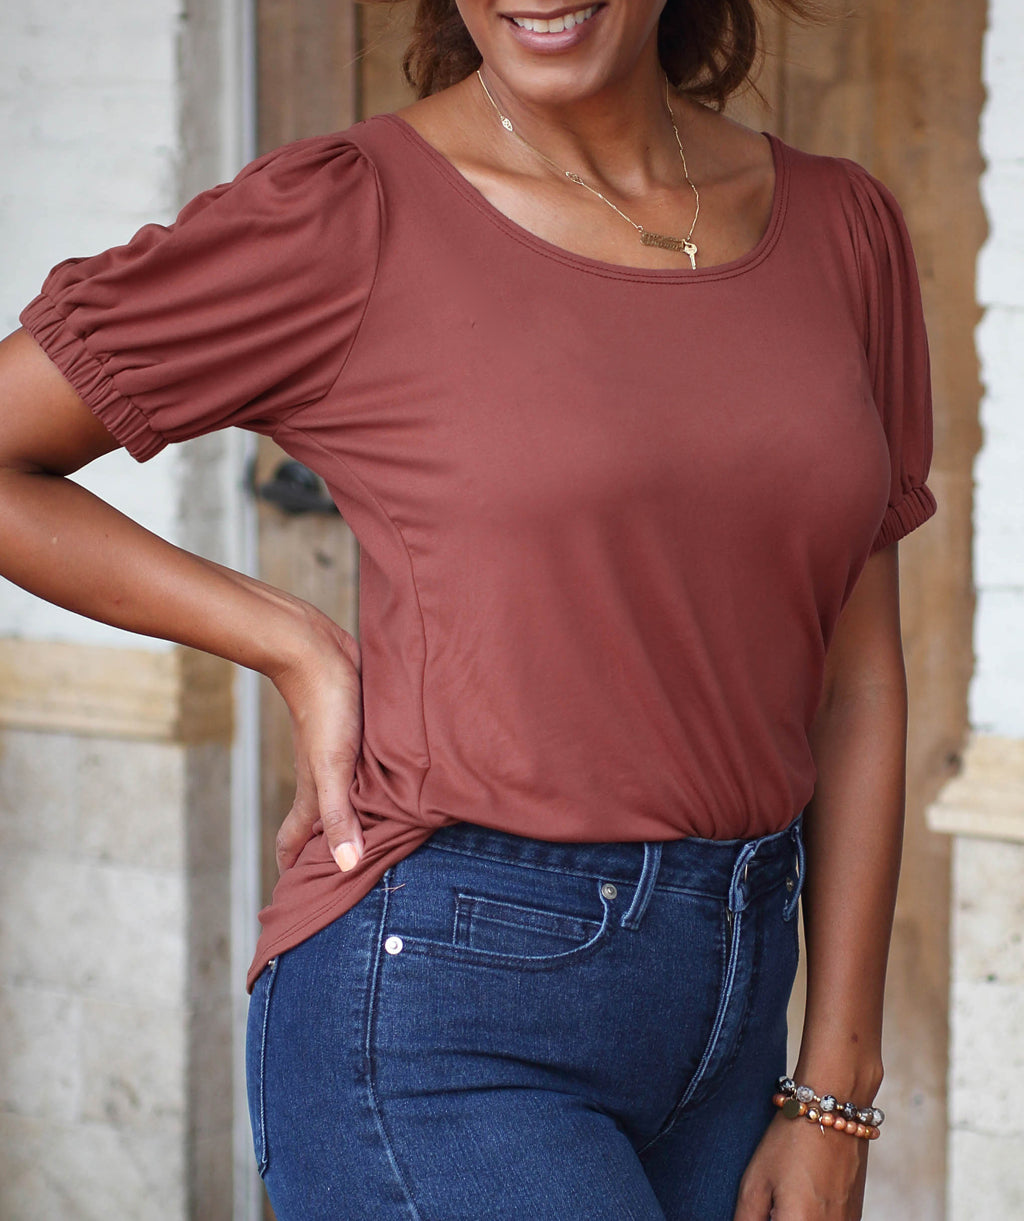 BROADWAY top in Dusty Mauve